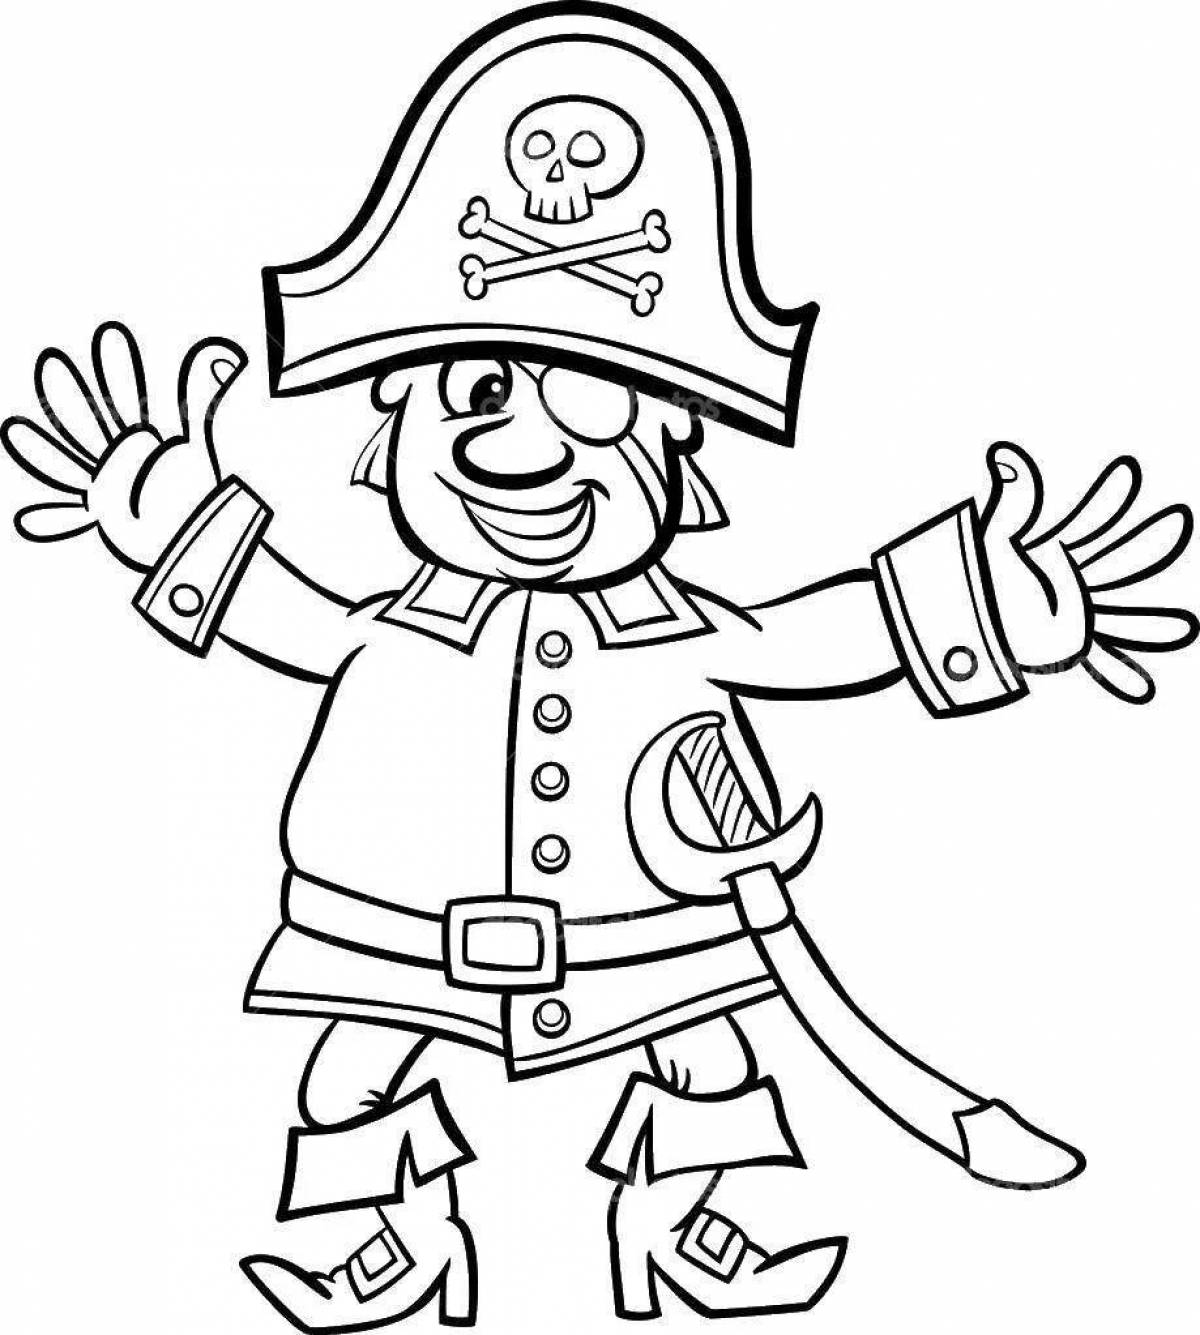 Inviting barmaley coloring for kids